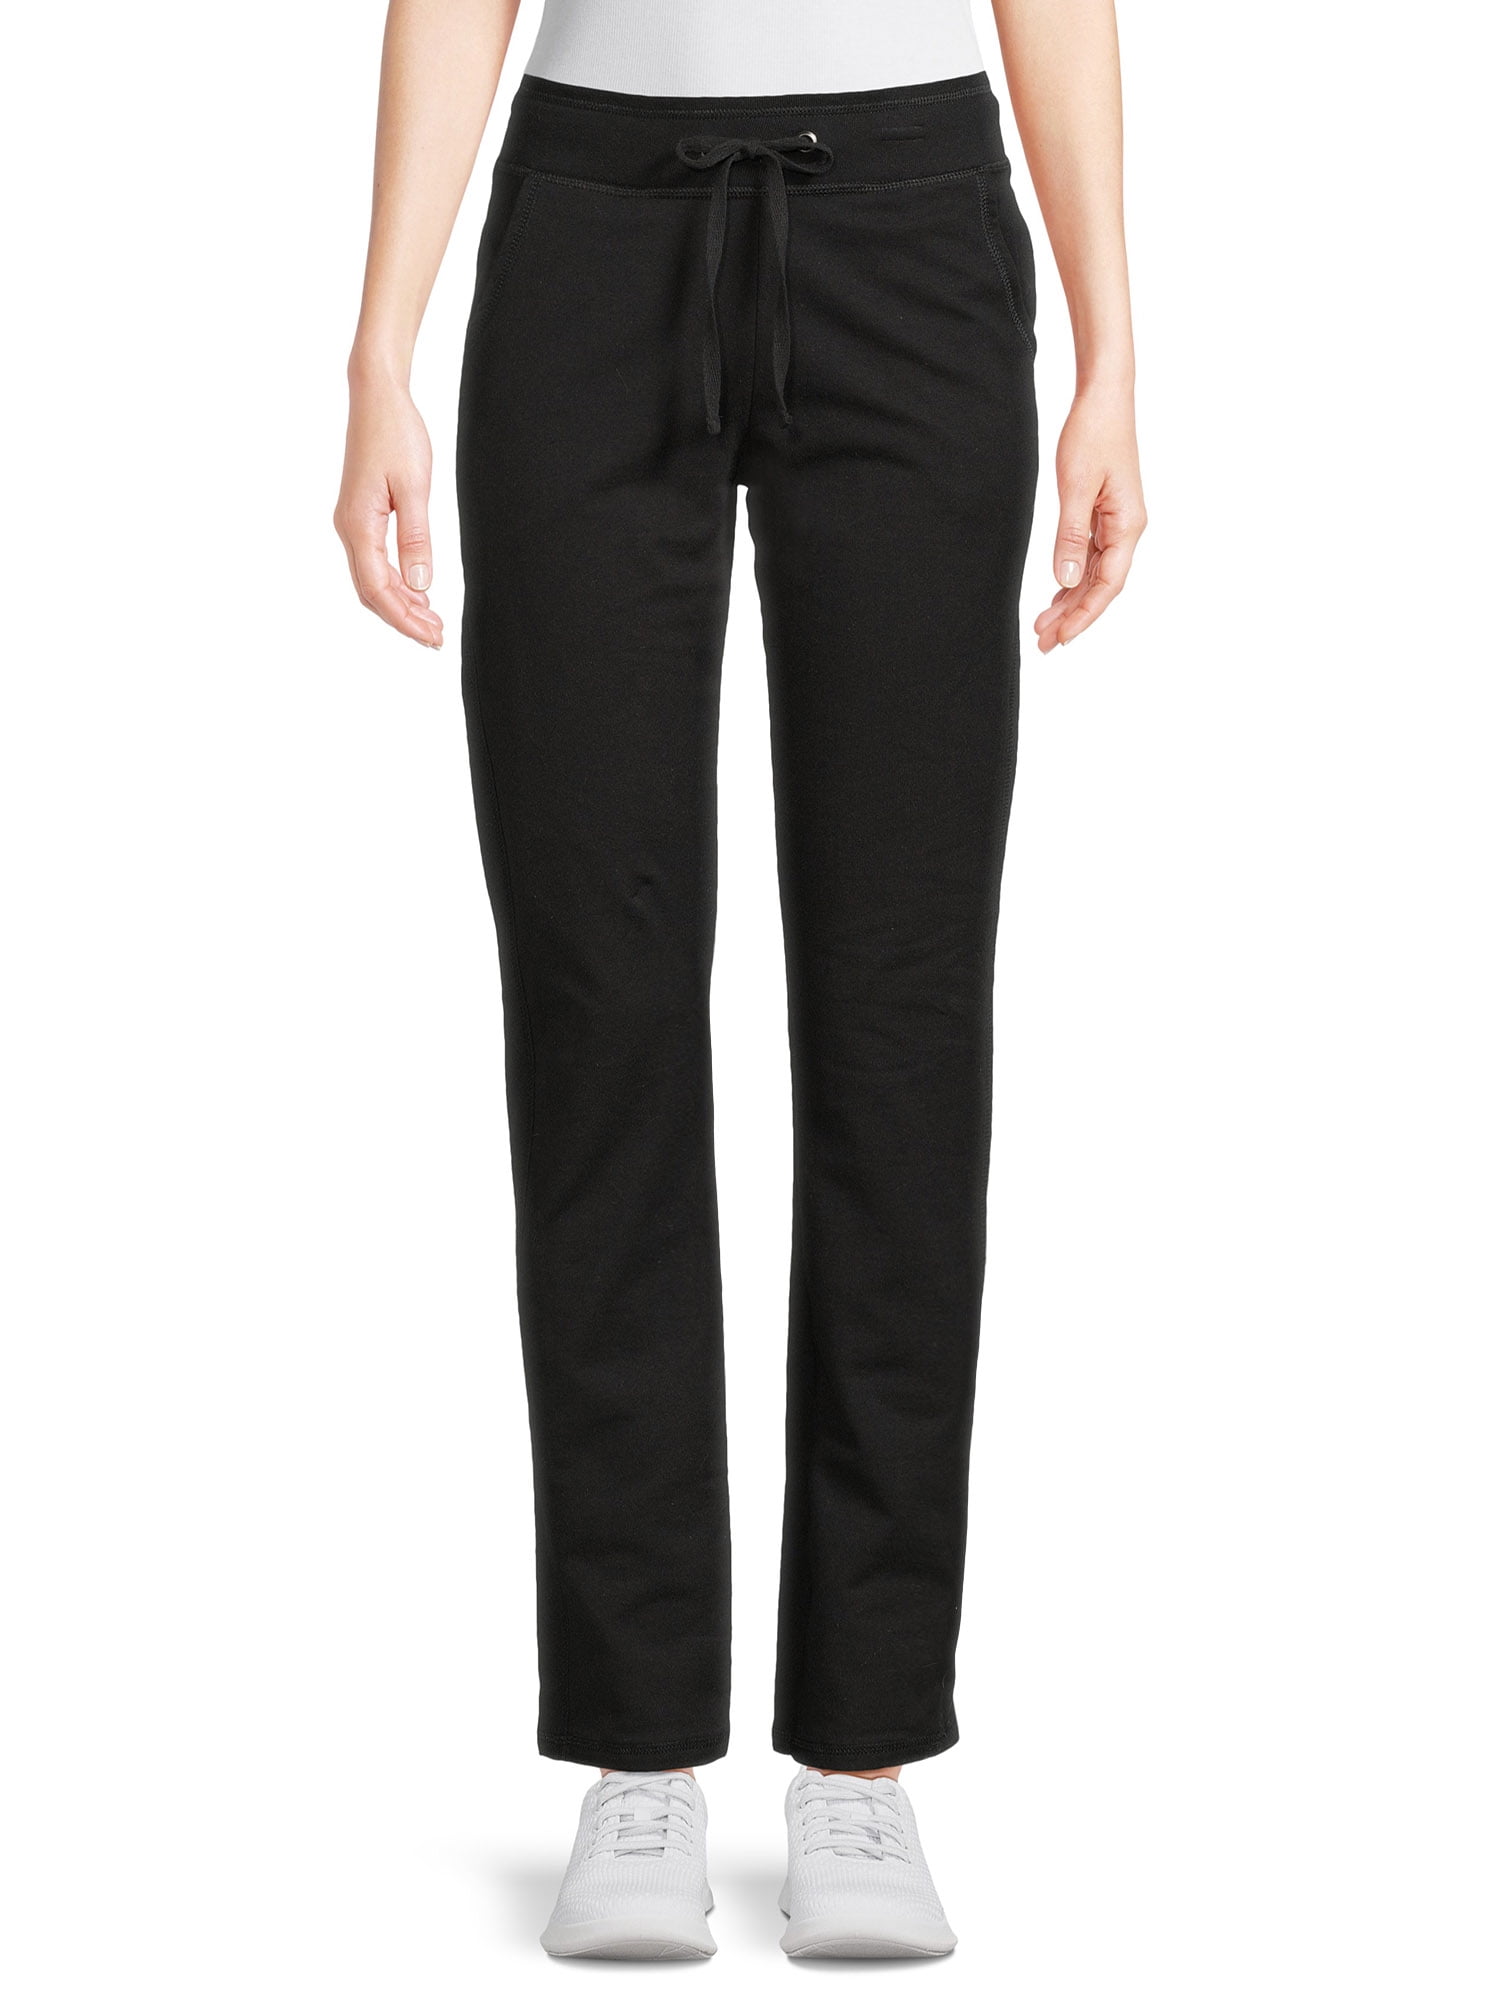 Hanes Women's French Terry Jogger with Pockets 